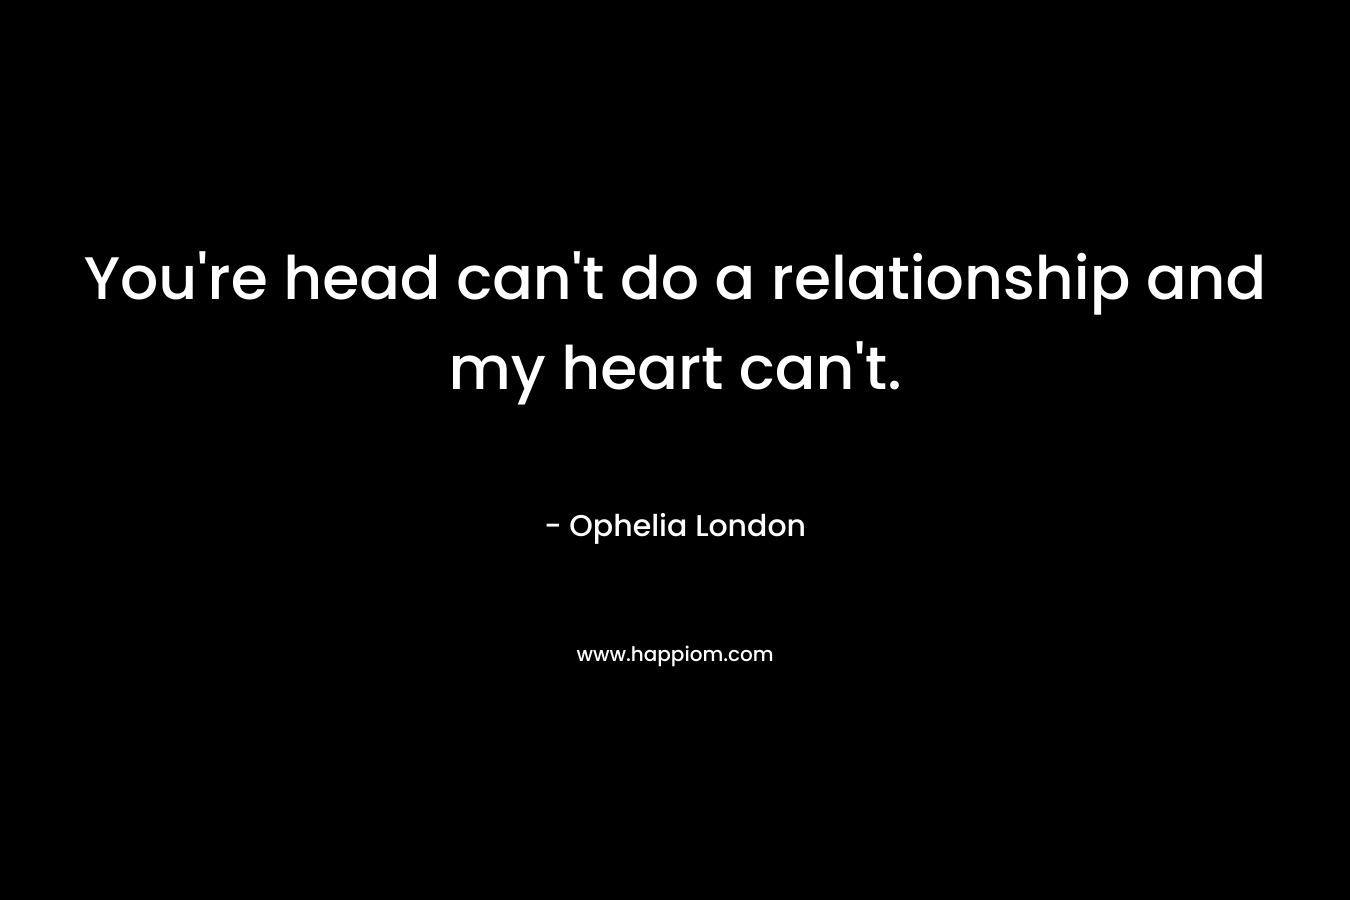 You're head can't do a relationship and my heart can't.